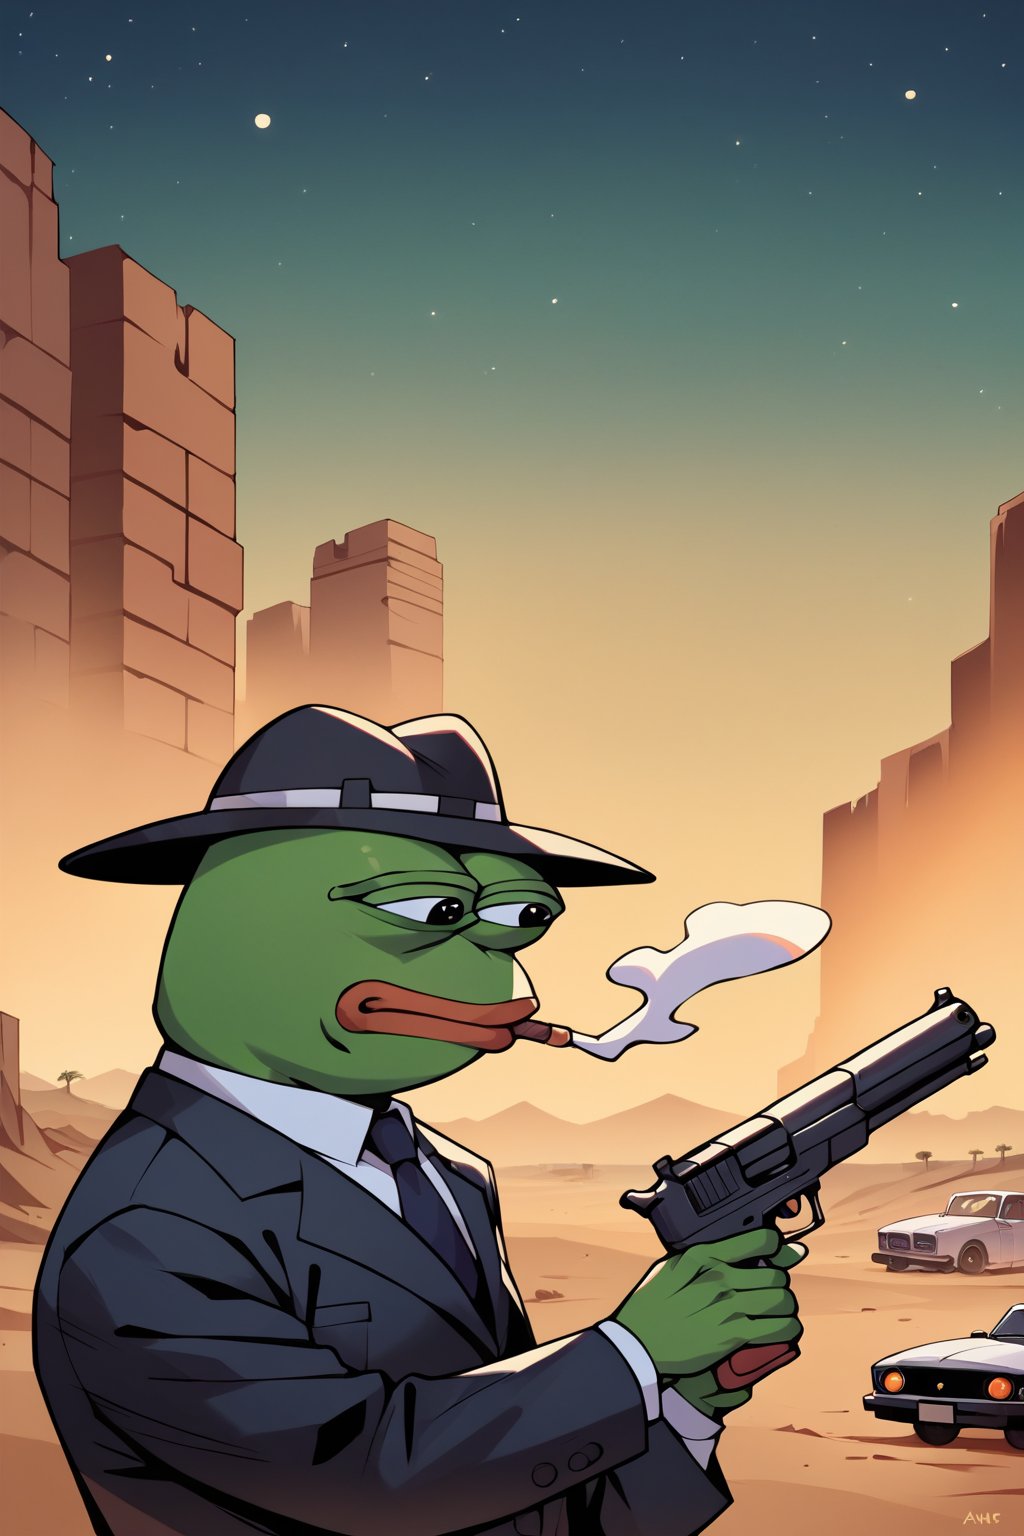 score_9, score_8, score_7, score_7_up, score_8_up, pepe the frog wearing black business suit, cowbot hat, smoking a cigar, holding shotgun, upper body, mojave desert, classic car in background, apocalyptic, exterior, night,0ut3rsp4c3